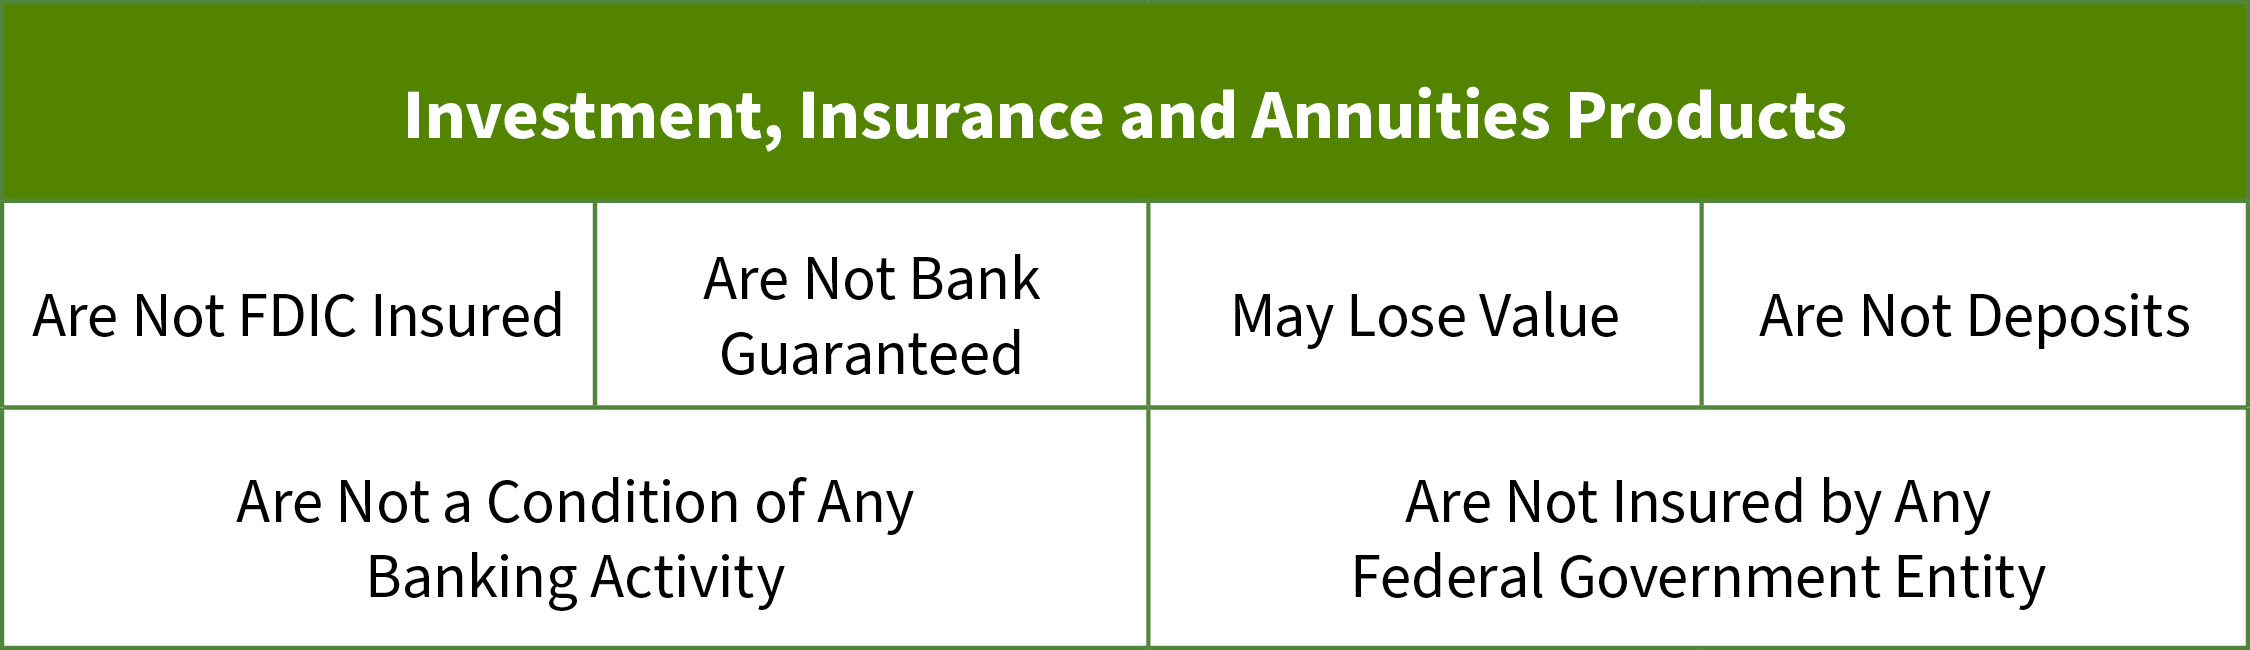 Investment, Insurance and Annuities Products